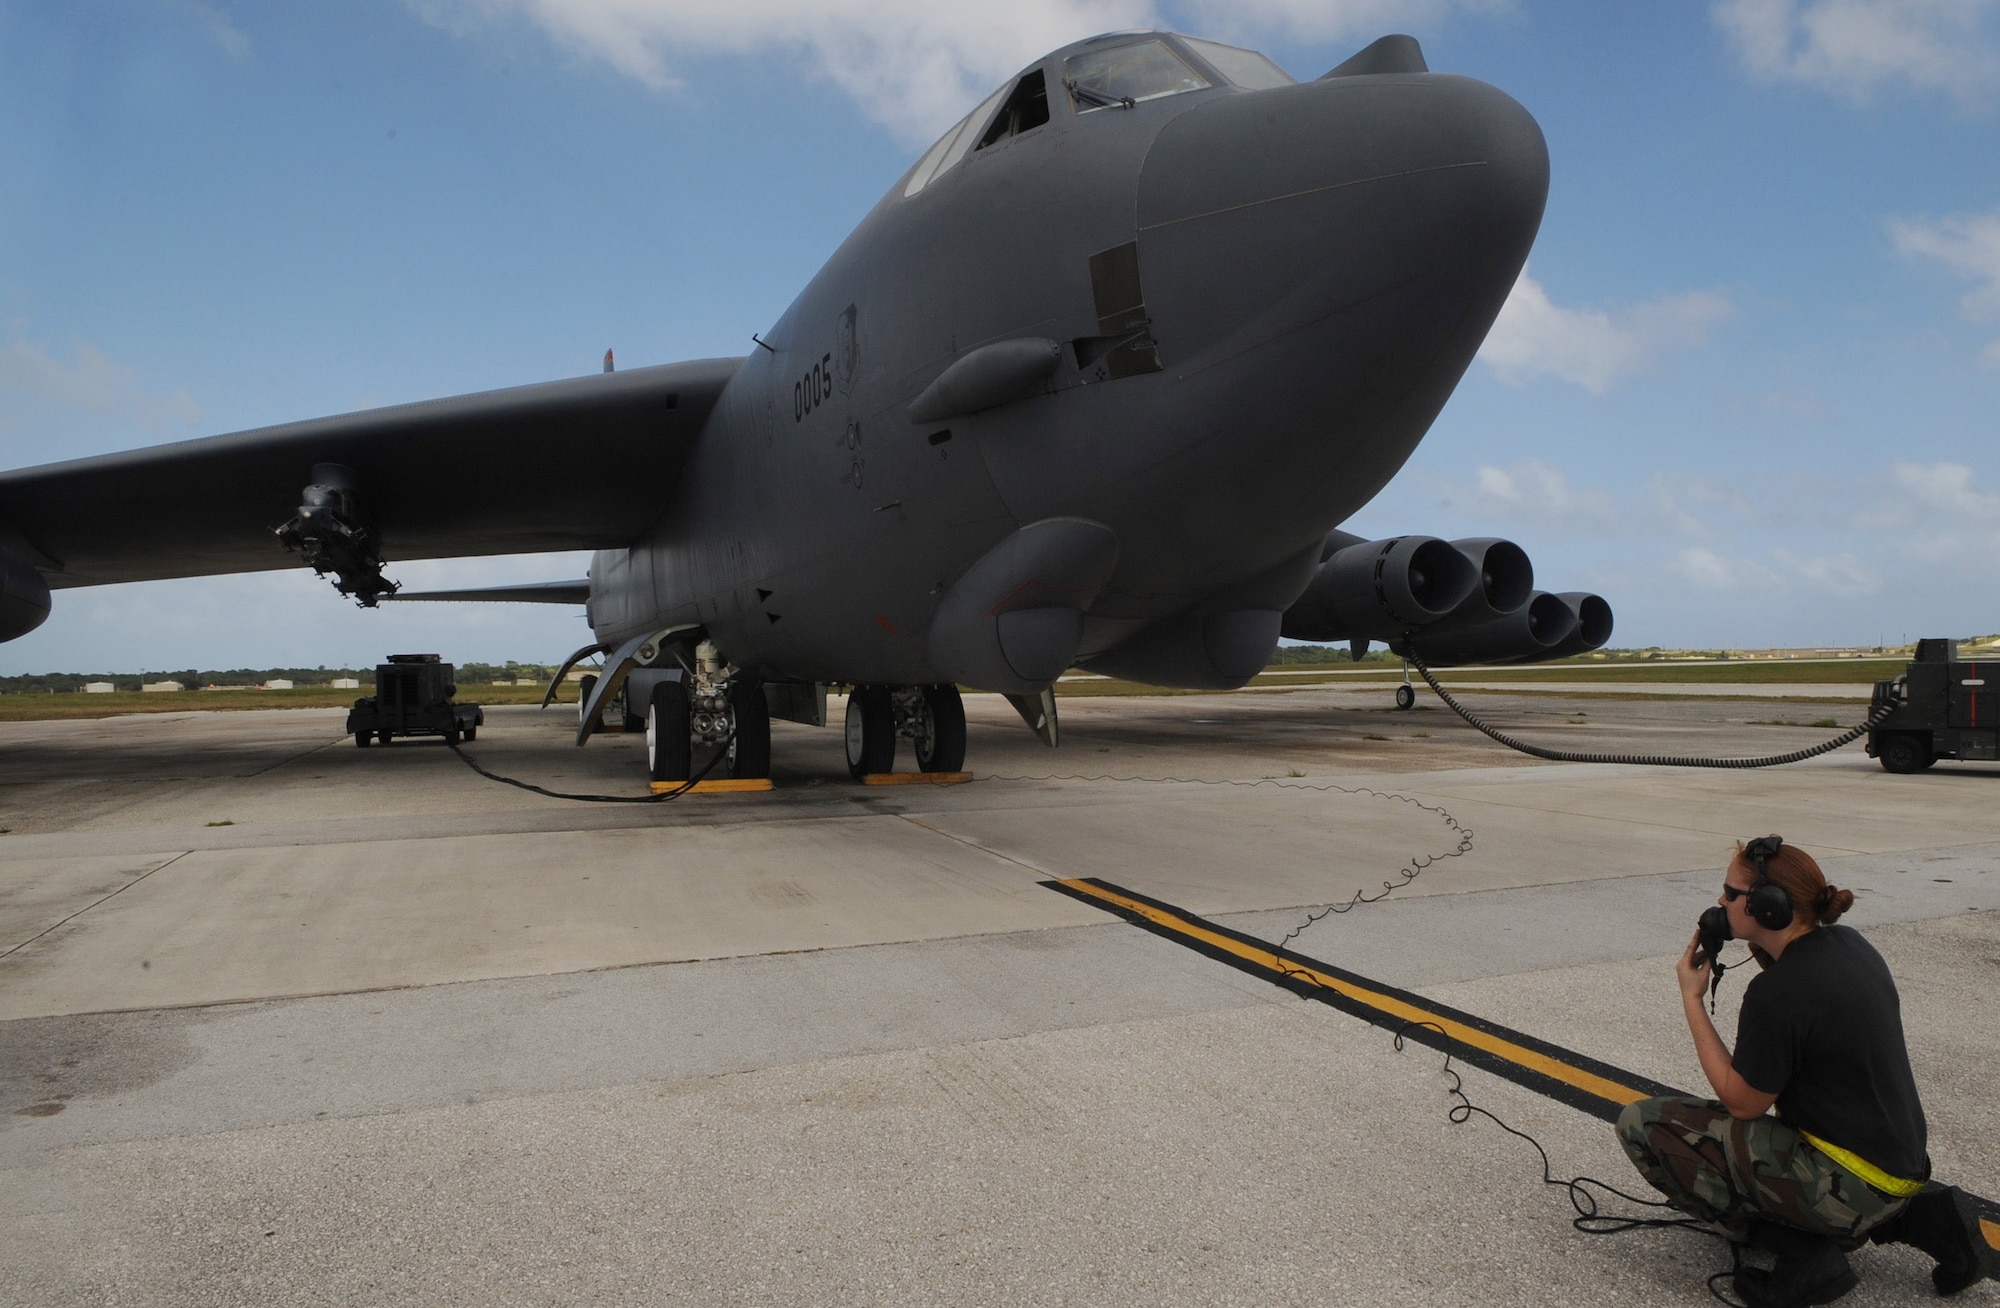 Airman 1st Class Caroline Kraus performs preflight checks during a B-52 Stratofortress launch Dec. 30 at Andersen Air Force Base, Guam. Airman Kraus is assigned to the 36th Expeditionary Aircraft Maintenance Squadron at Andersen and is deployed from Minot AFB, N.D. The bomber's participation in constant training helps emphasize the U.S. bomber presence, demonstrating U.S. commitment to the Pacific region. (U.S. Air Force photo/Master Sgt. Kevin J. Gruenwald)